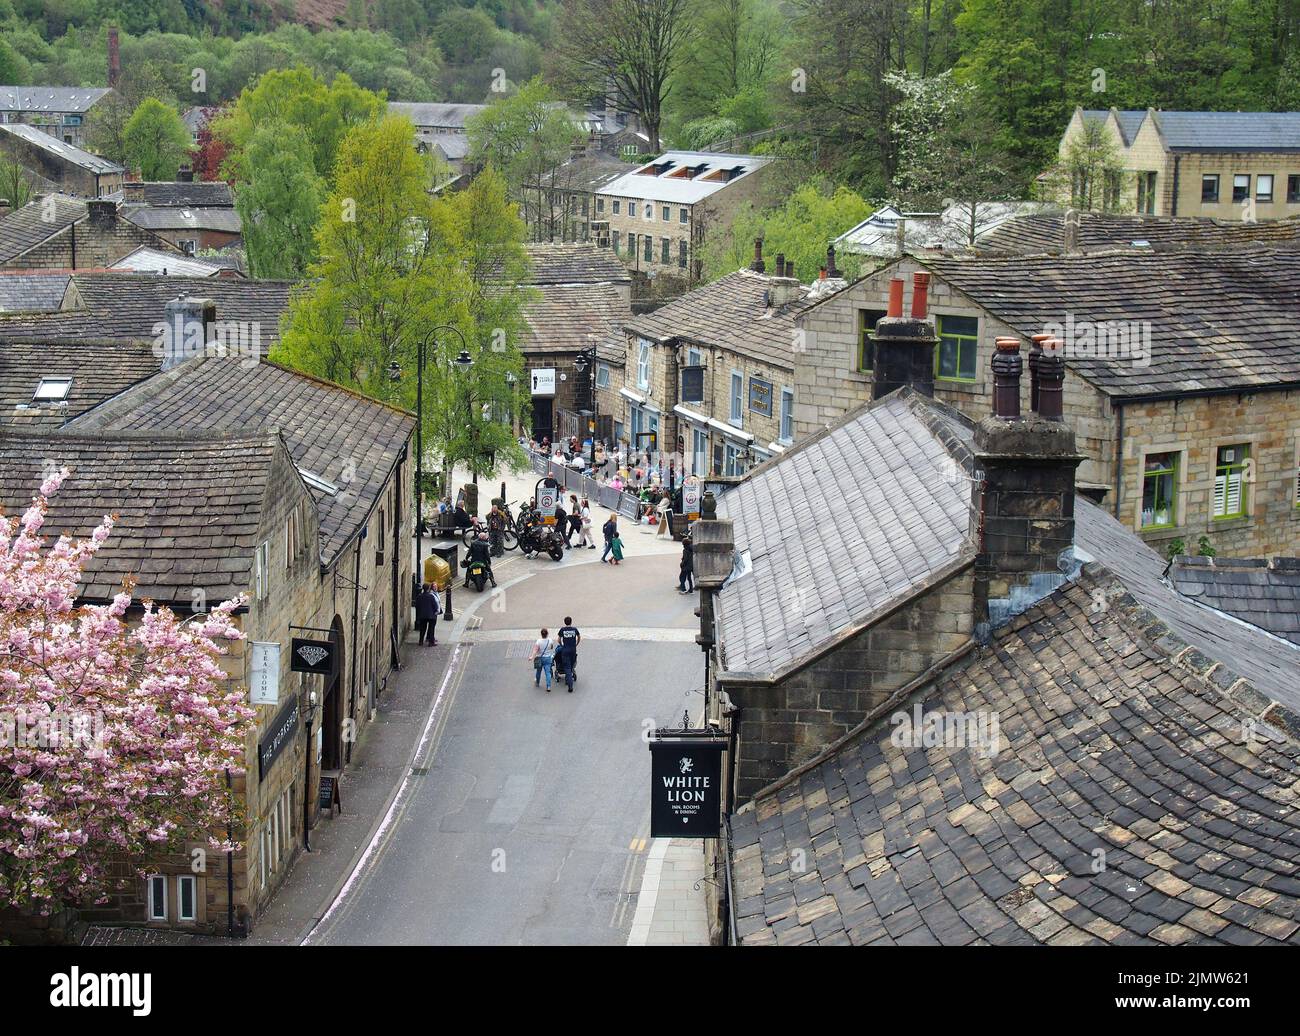 Panoramic view of the town of hebden bridge with people outside pubs and bars in the town square Stock Photo